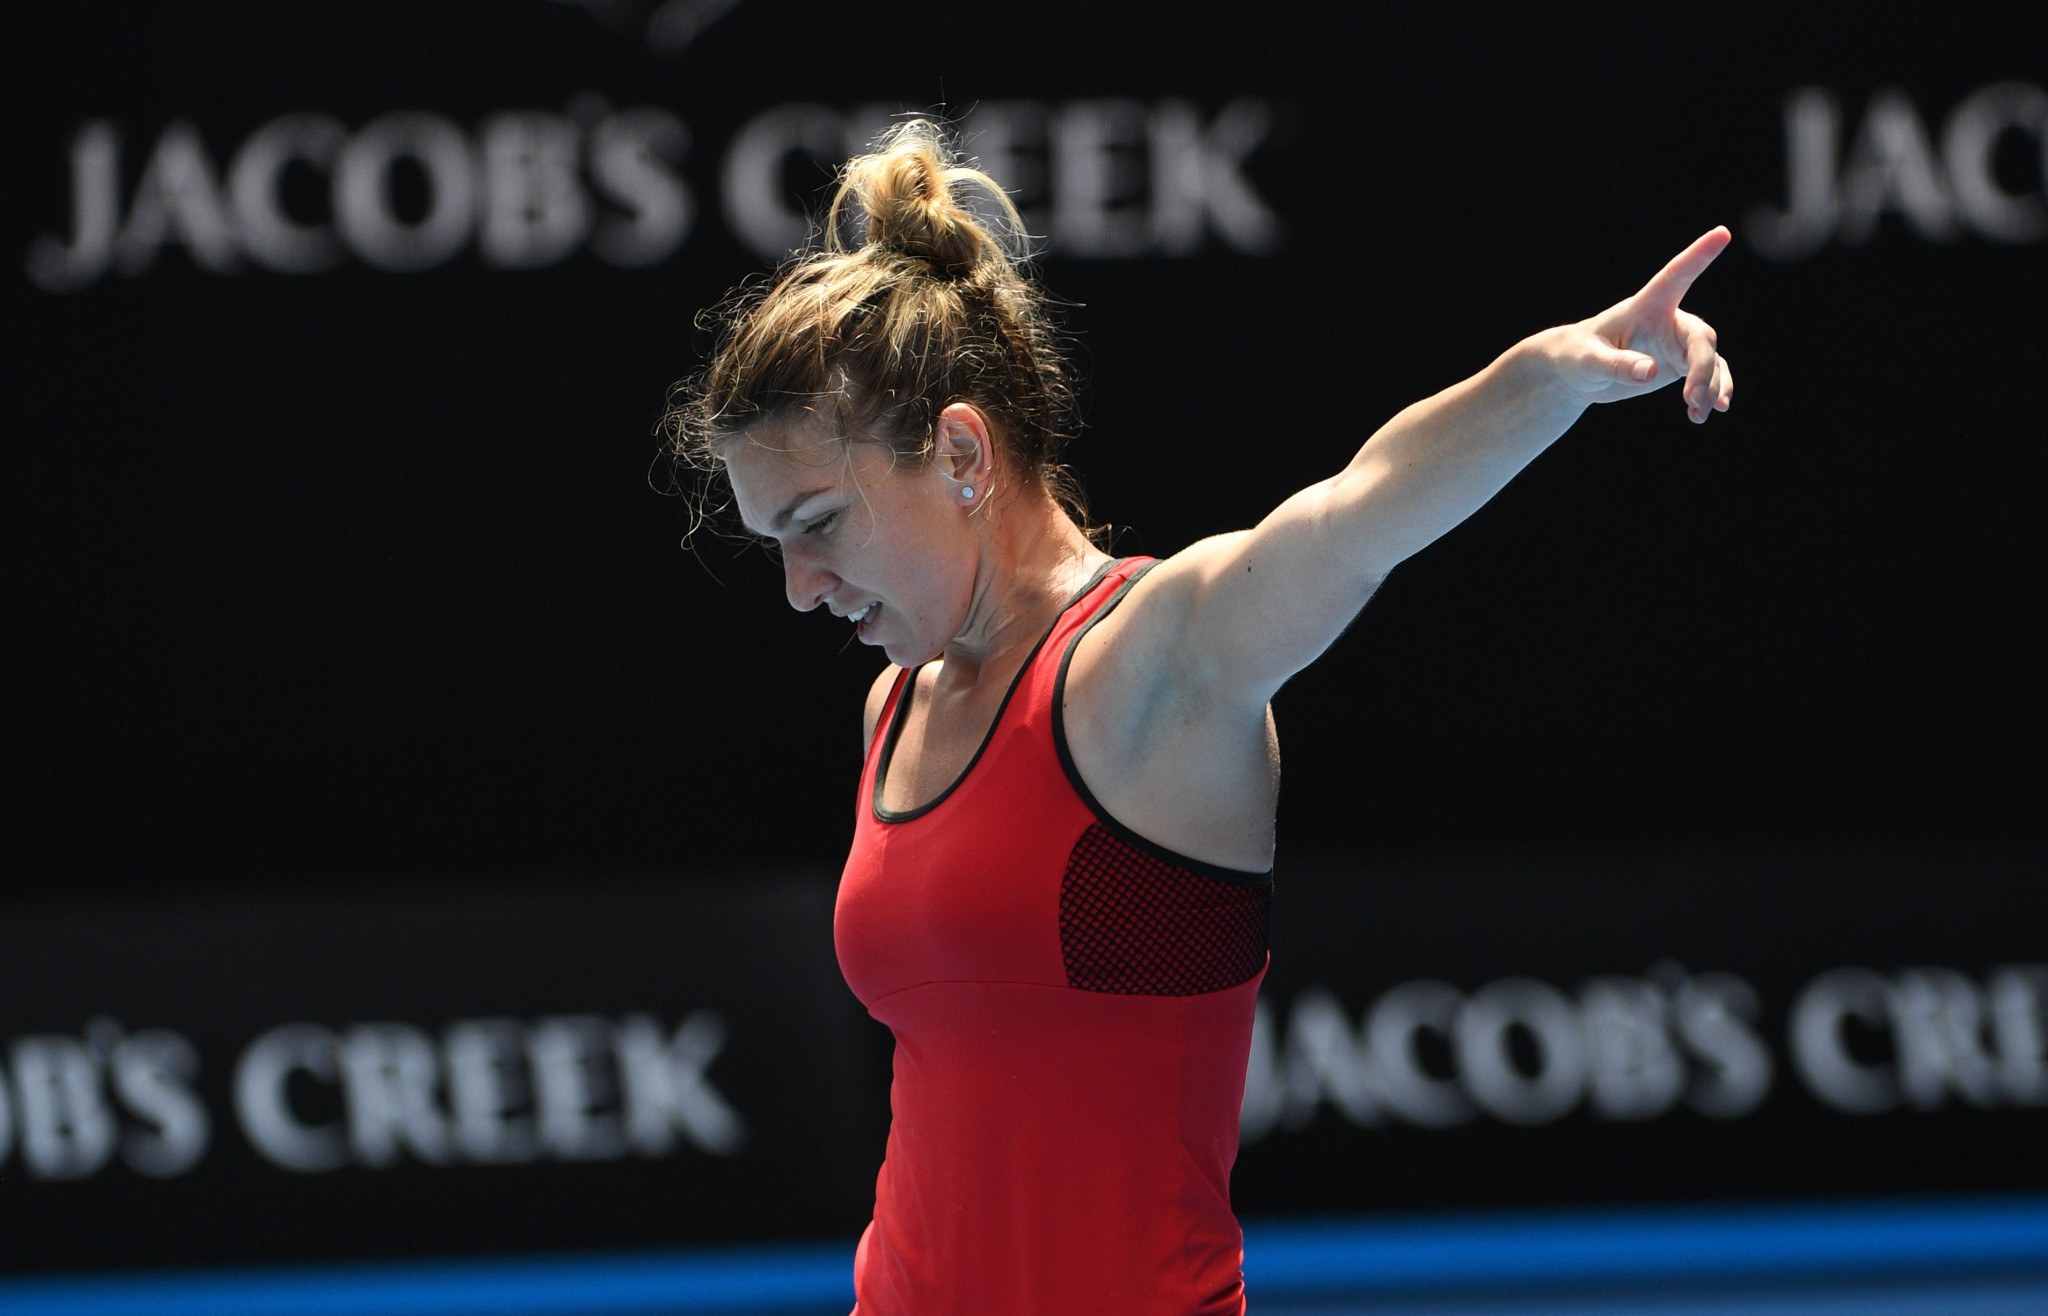 Halep and Kerber win in contrasting styles at Australian Open